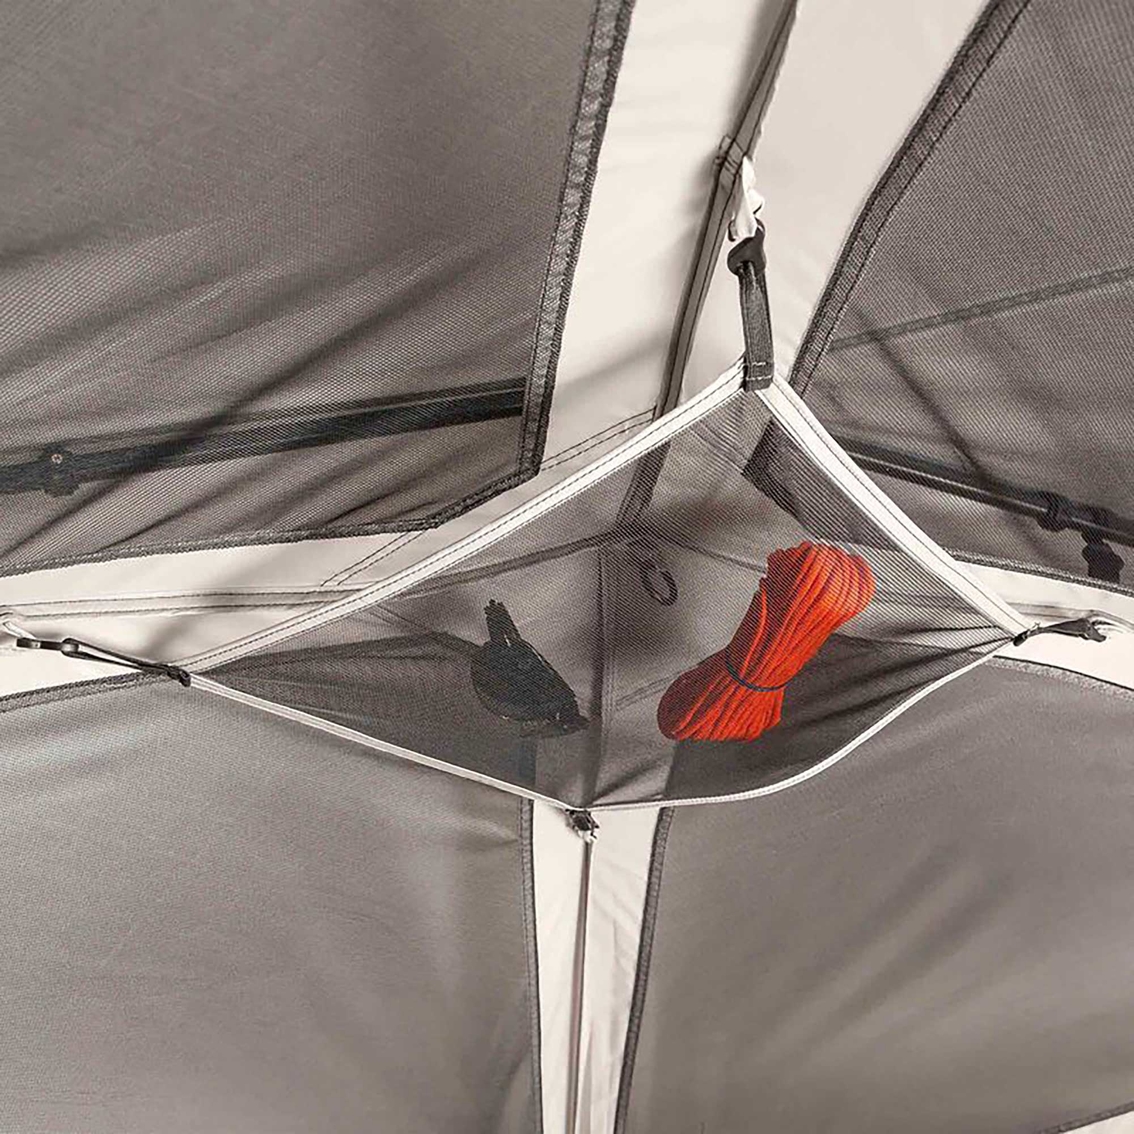 Bushnell 6 Person Outdoorsman Instant Cabin Tent - Image 5 of 6